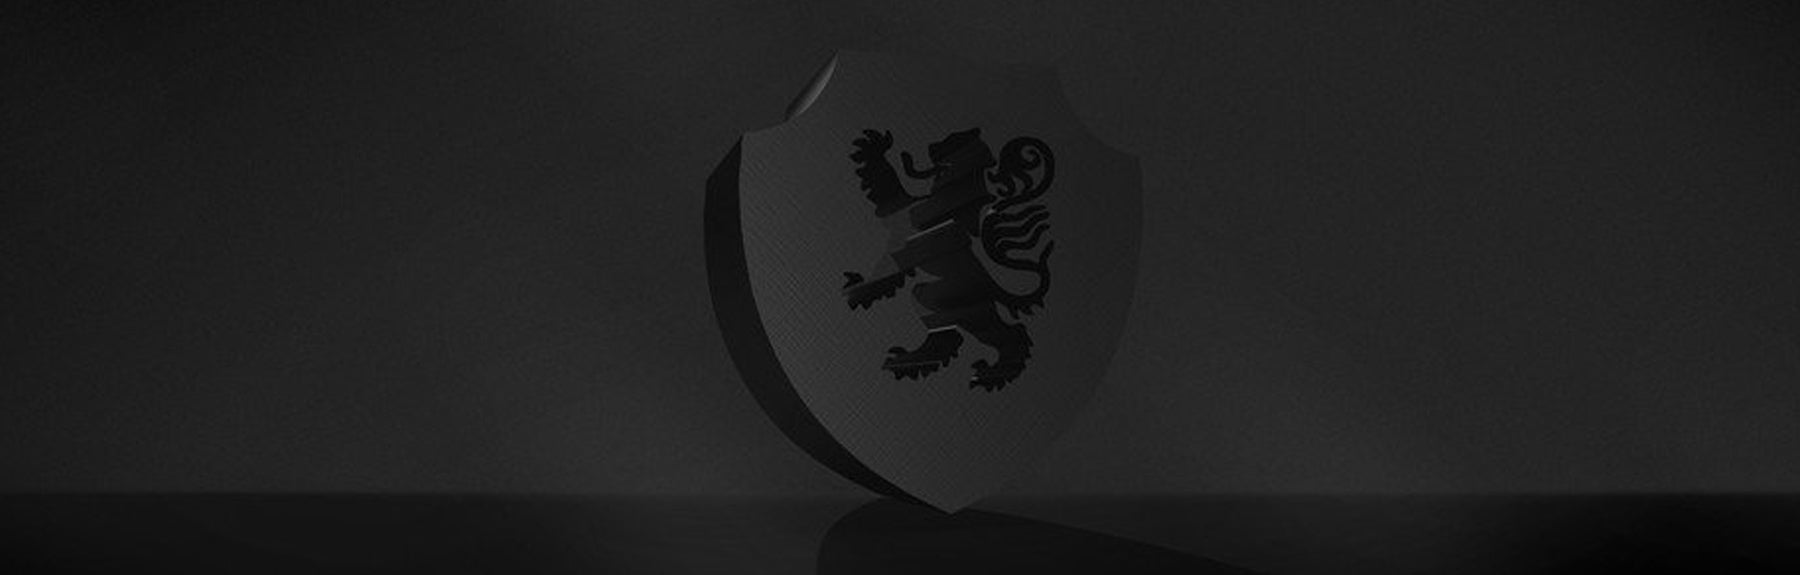 Home Page Fuzion Banner with Shield/Rampant Lion